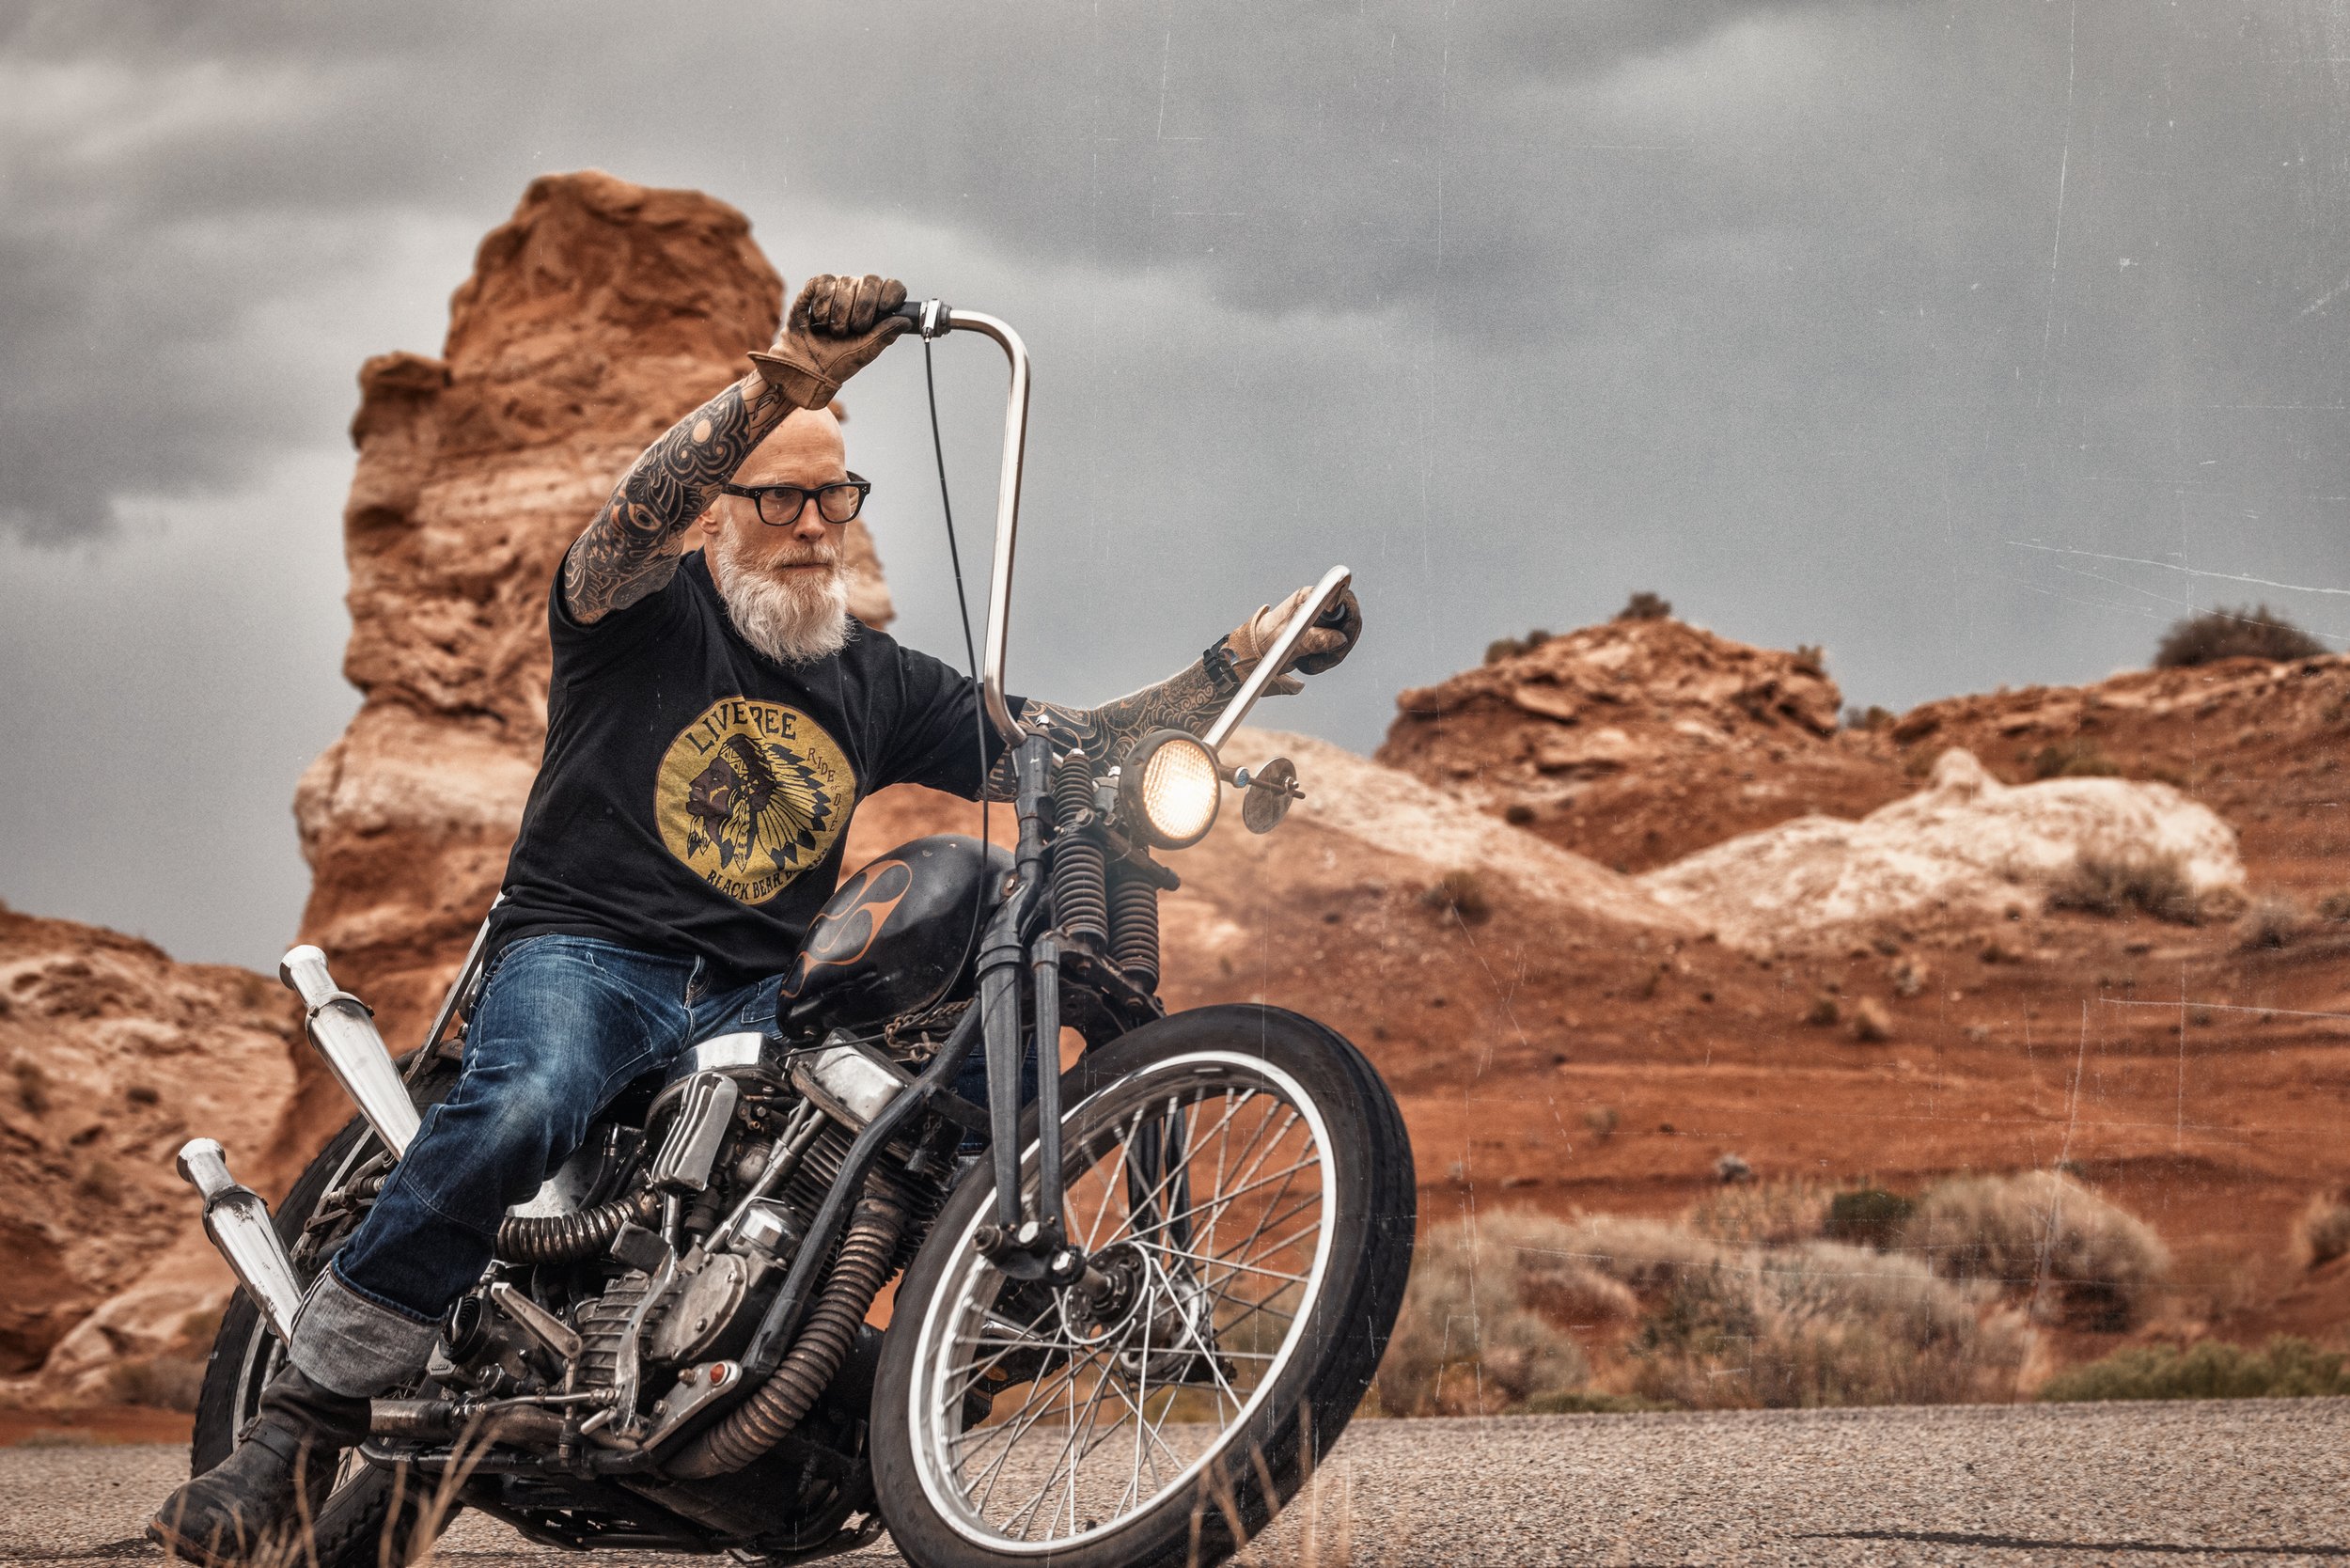    Riding into the Wild West with the King of Cool 🏍️👑. Join us on an epic adventure as Black Bear Brand cruises on the most badass chopper, decked out in denim and rocking the ultimate t-shirt. 🤘 #BornToRide #WildWestAdventures #ChopperLife #King